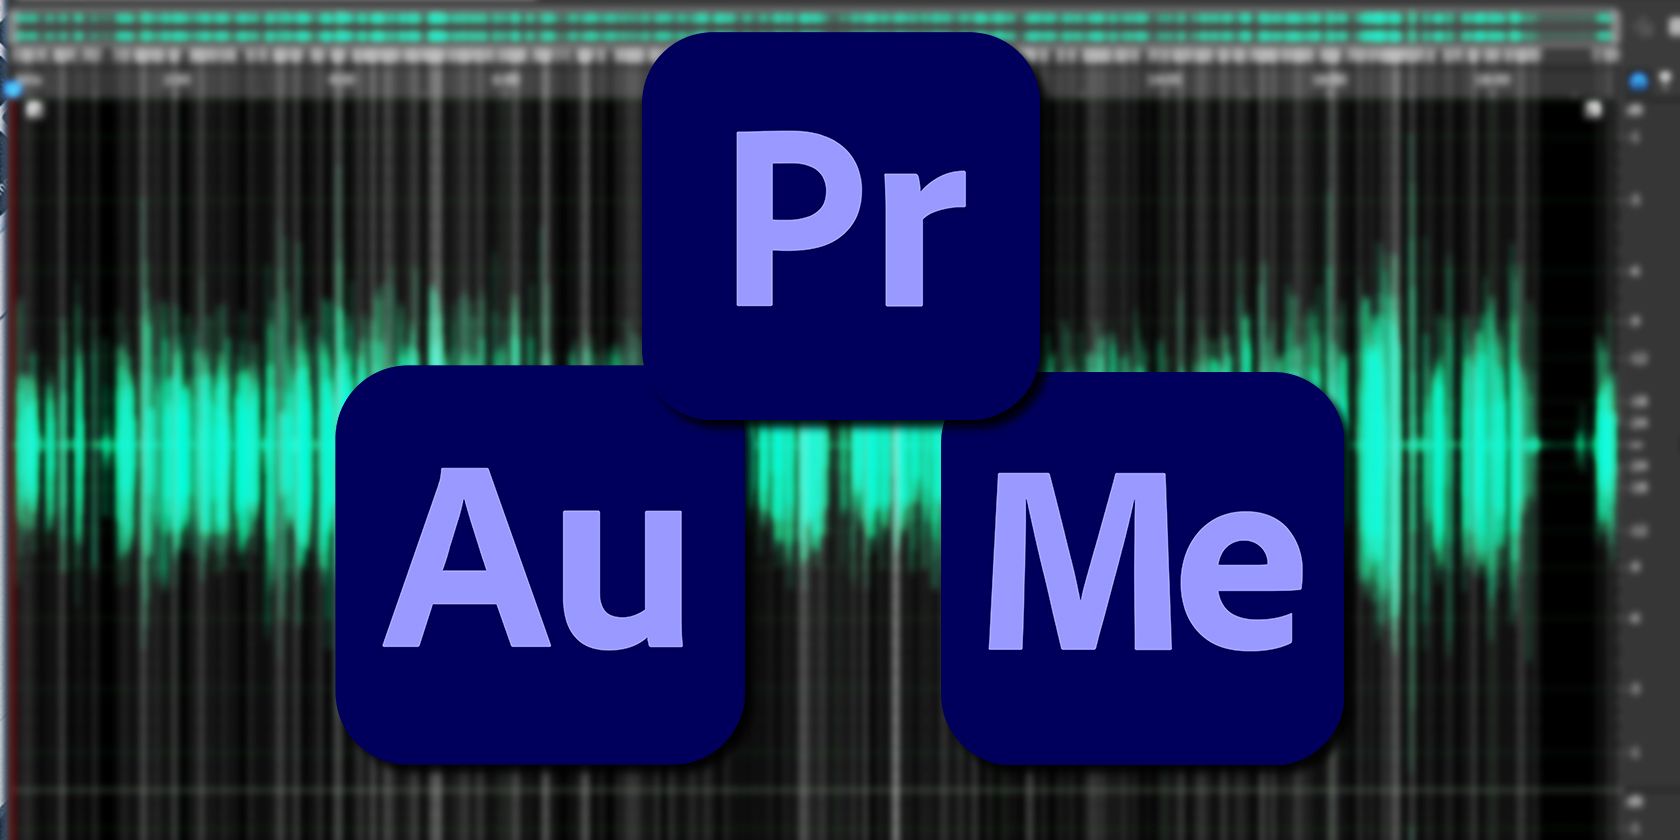 Adobe software icons in front of an audio waveform